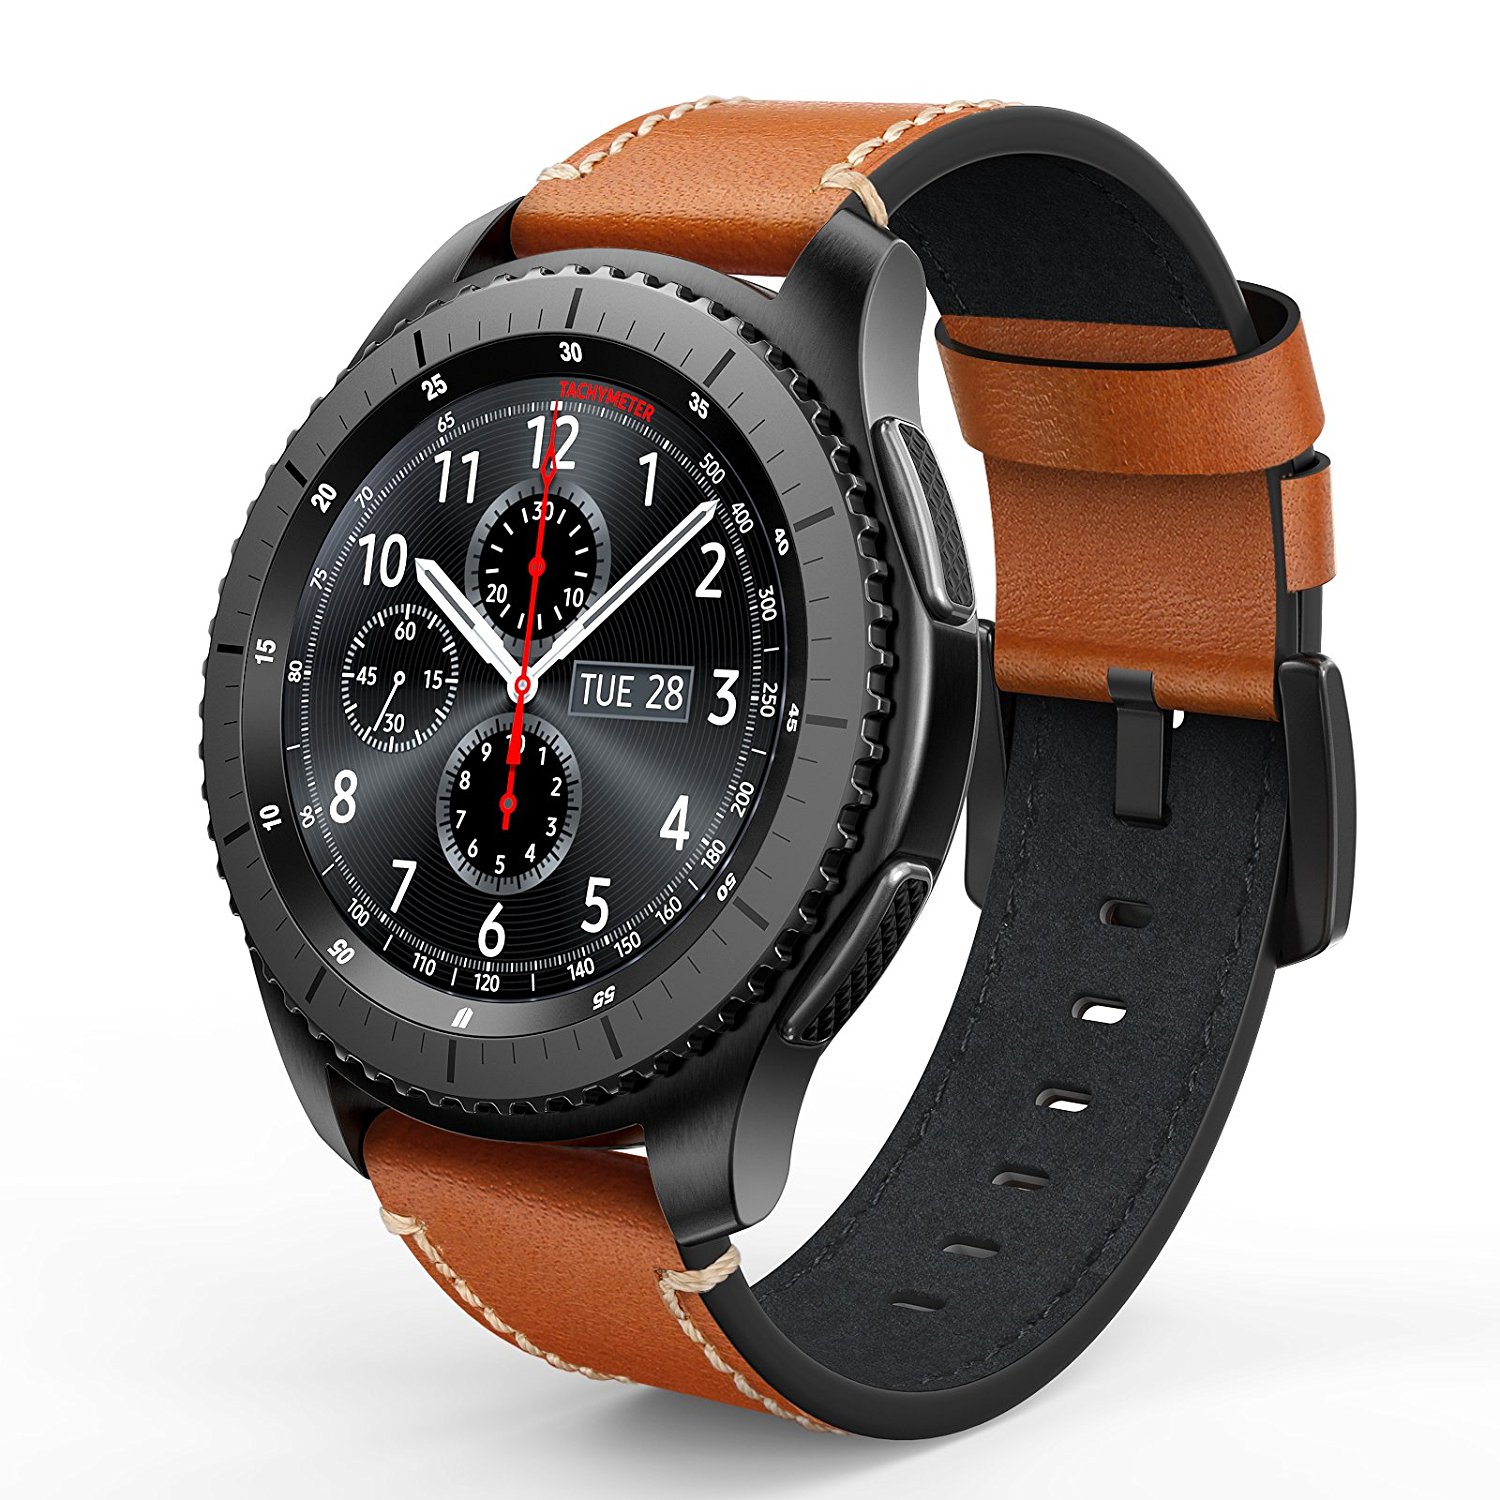 Best bands for Gear S3 Frontier and 